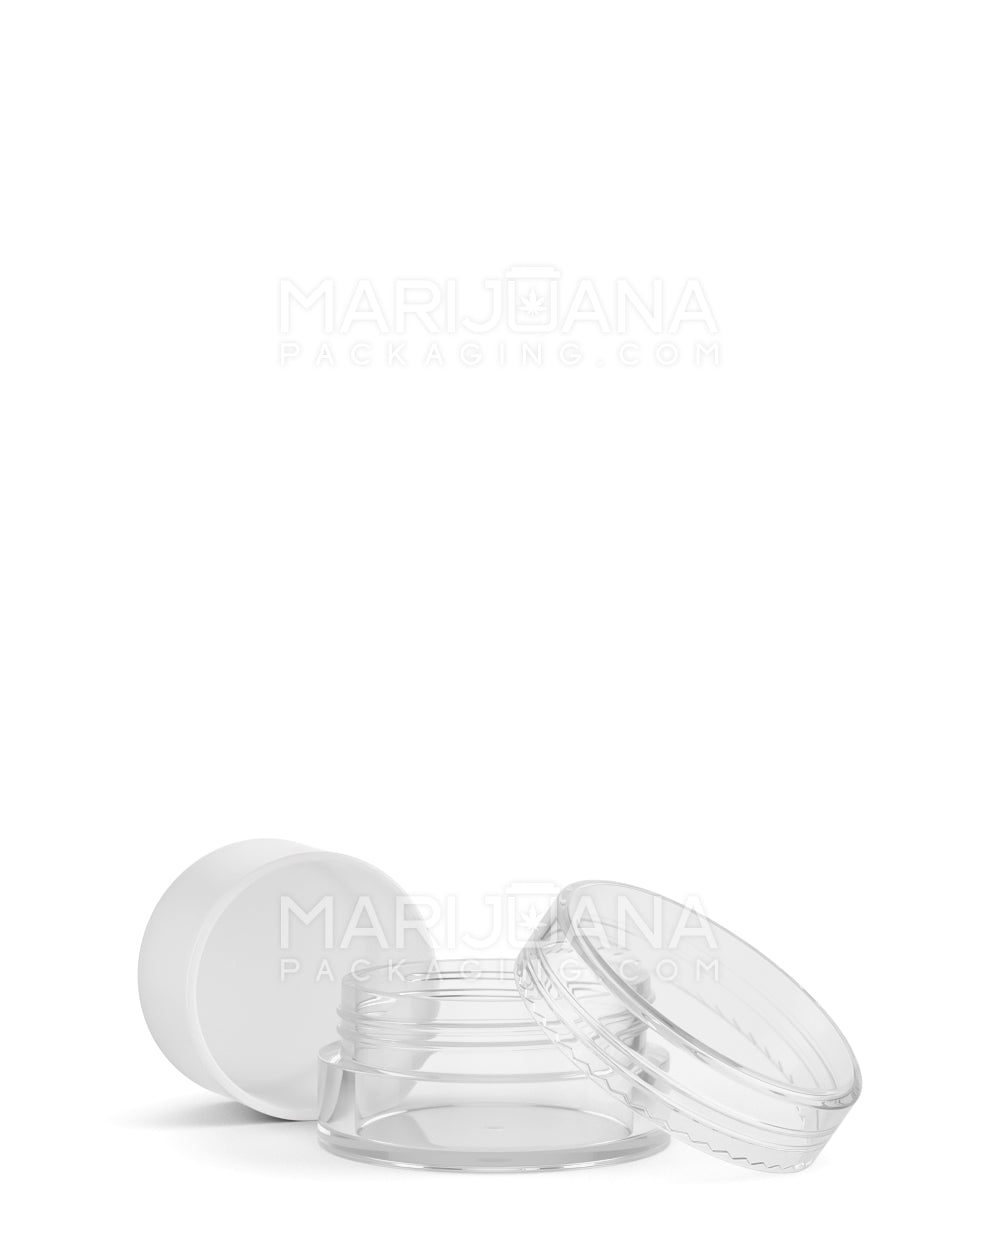 Clear Concentrate Containers w/ Screw Top Cap & White Silicone Insert | 5mL - Plastic - 100 Count - 4